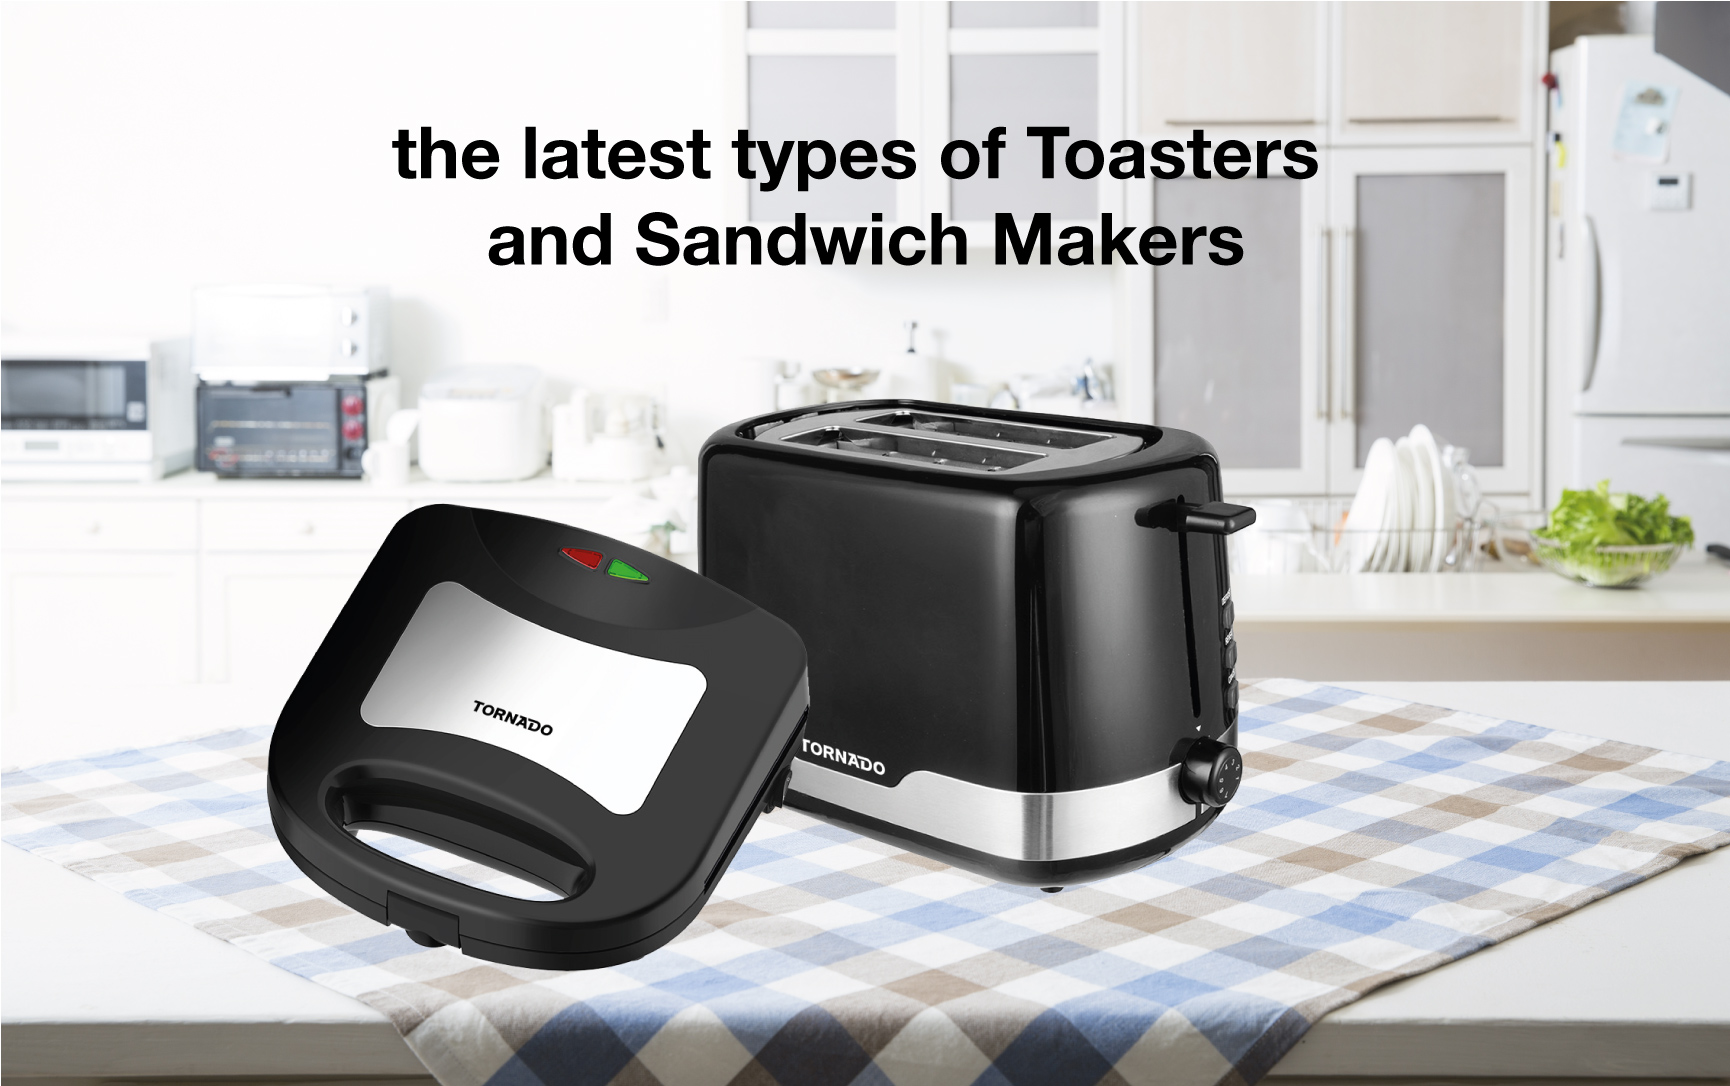 The latest types of Toasters and Sandwich Makers